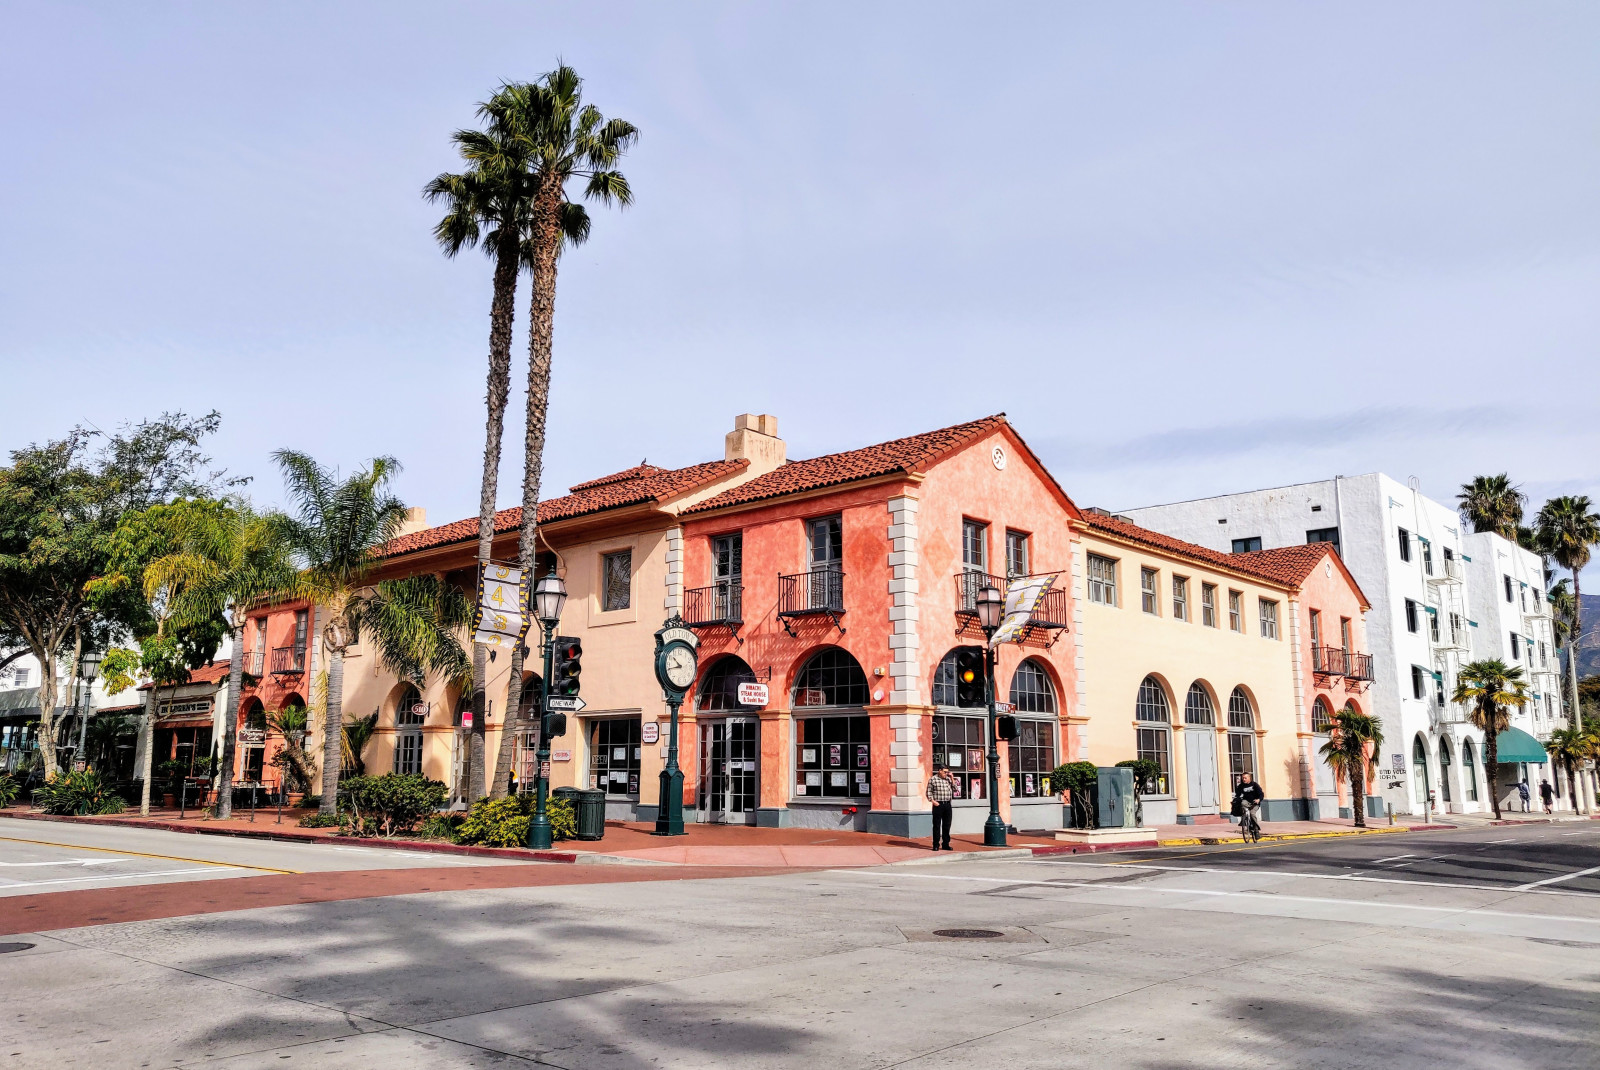 Palm tree and colorful buildings in downtown Santa Barbara